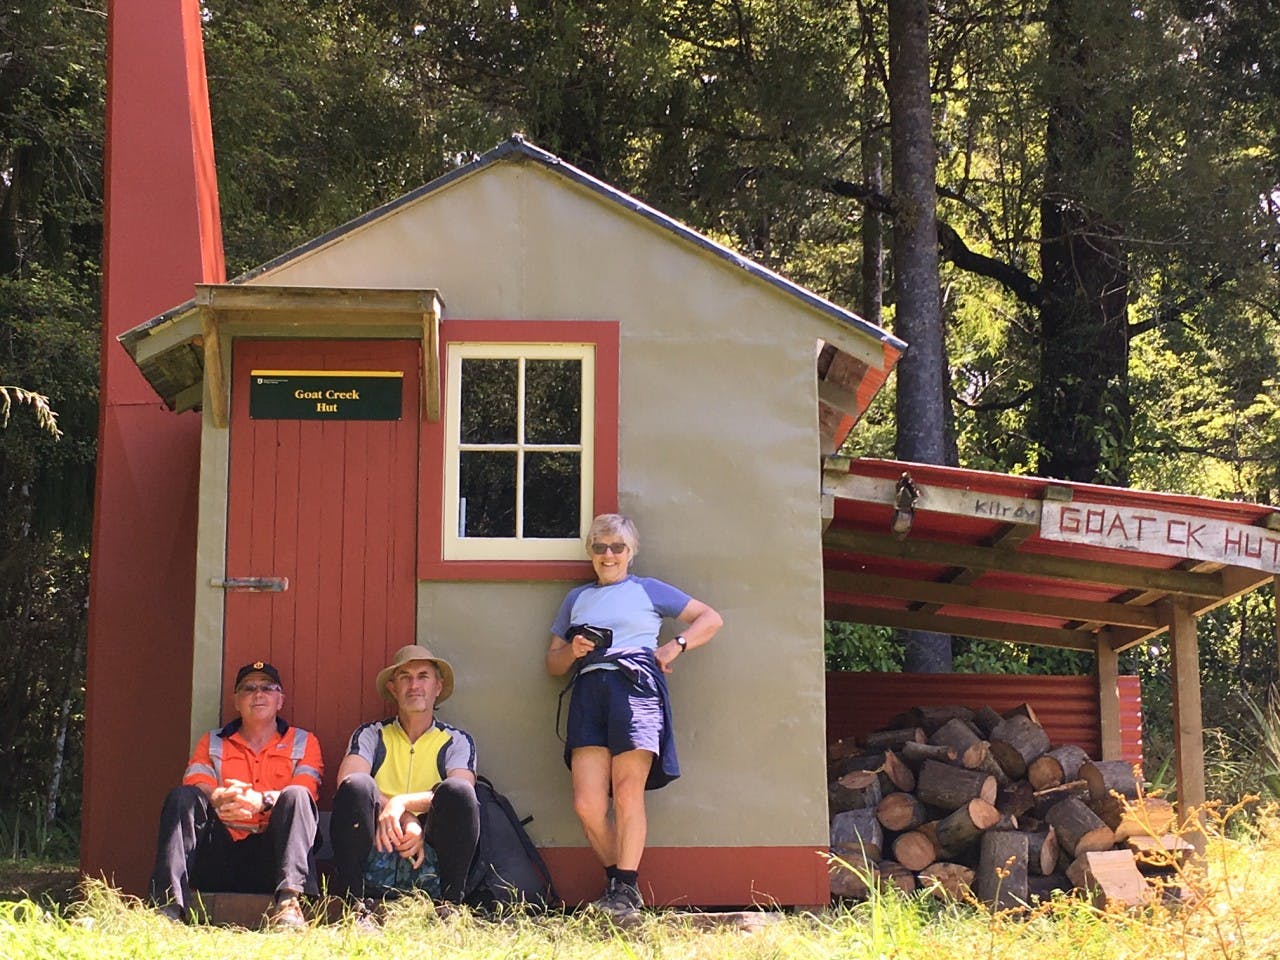 Goat Creek Hut, looking better than ever with a new coat of paint. Photo: Buller Tramping Club